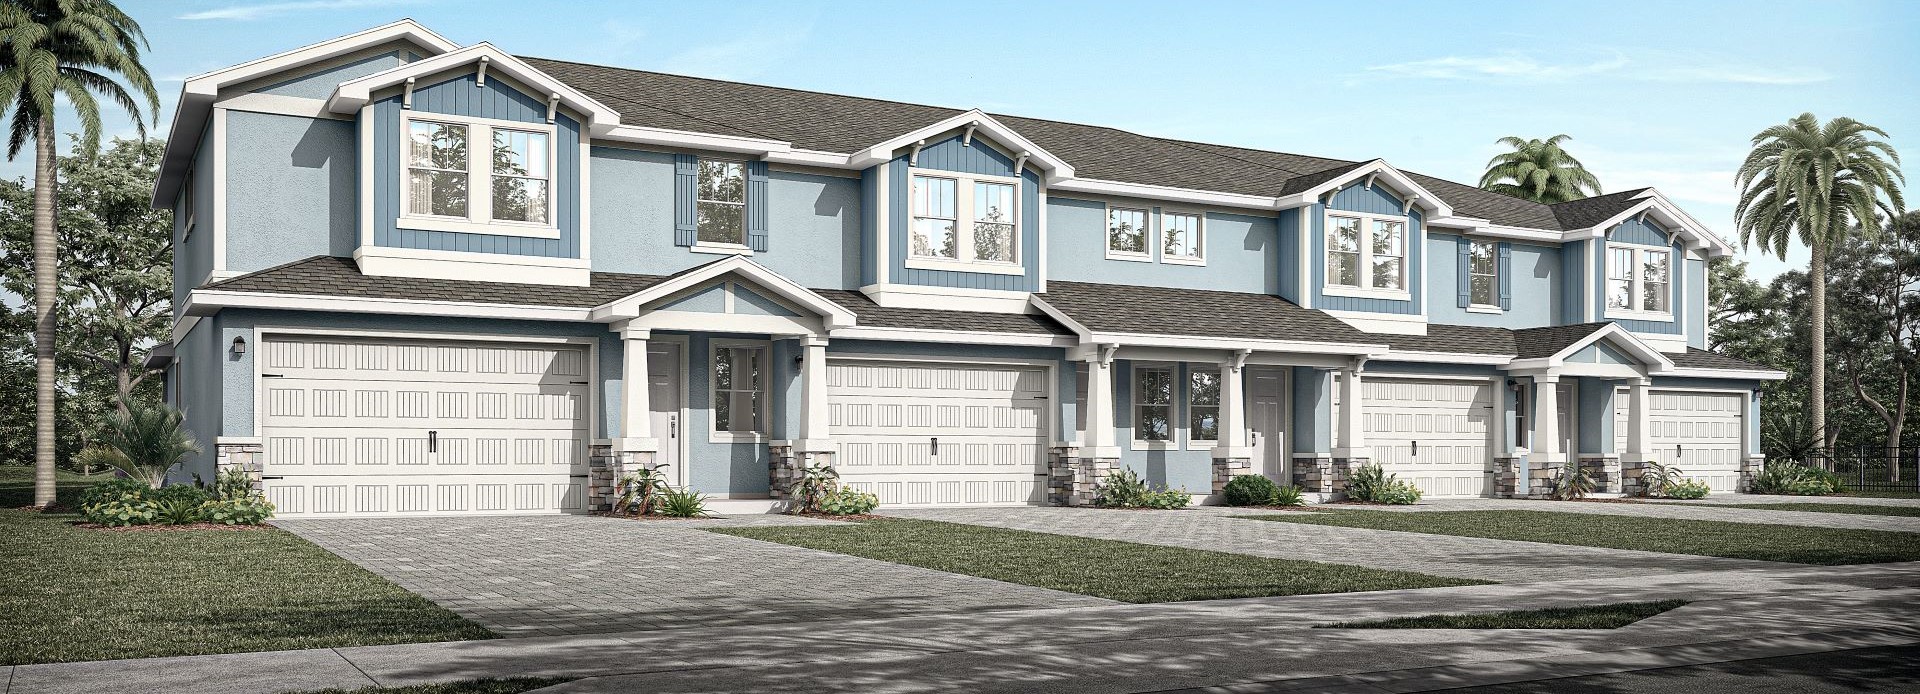 Townhome Rendering resized